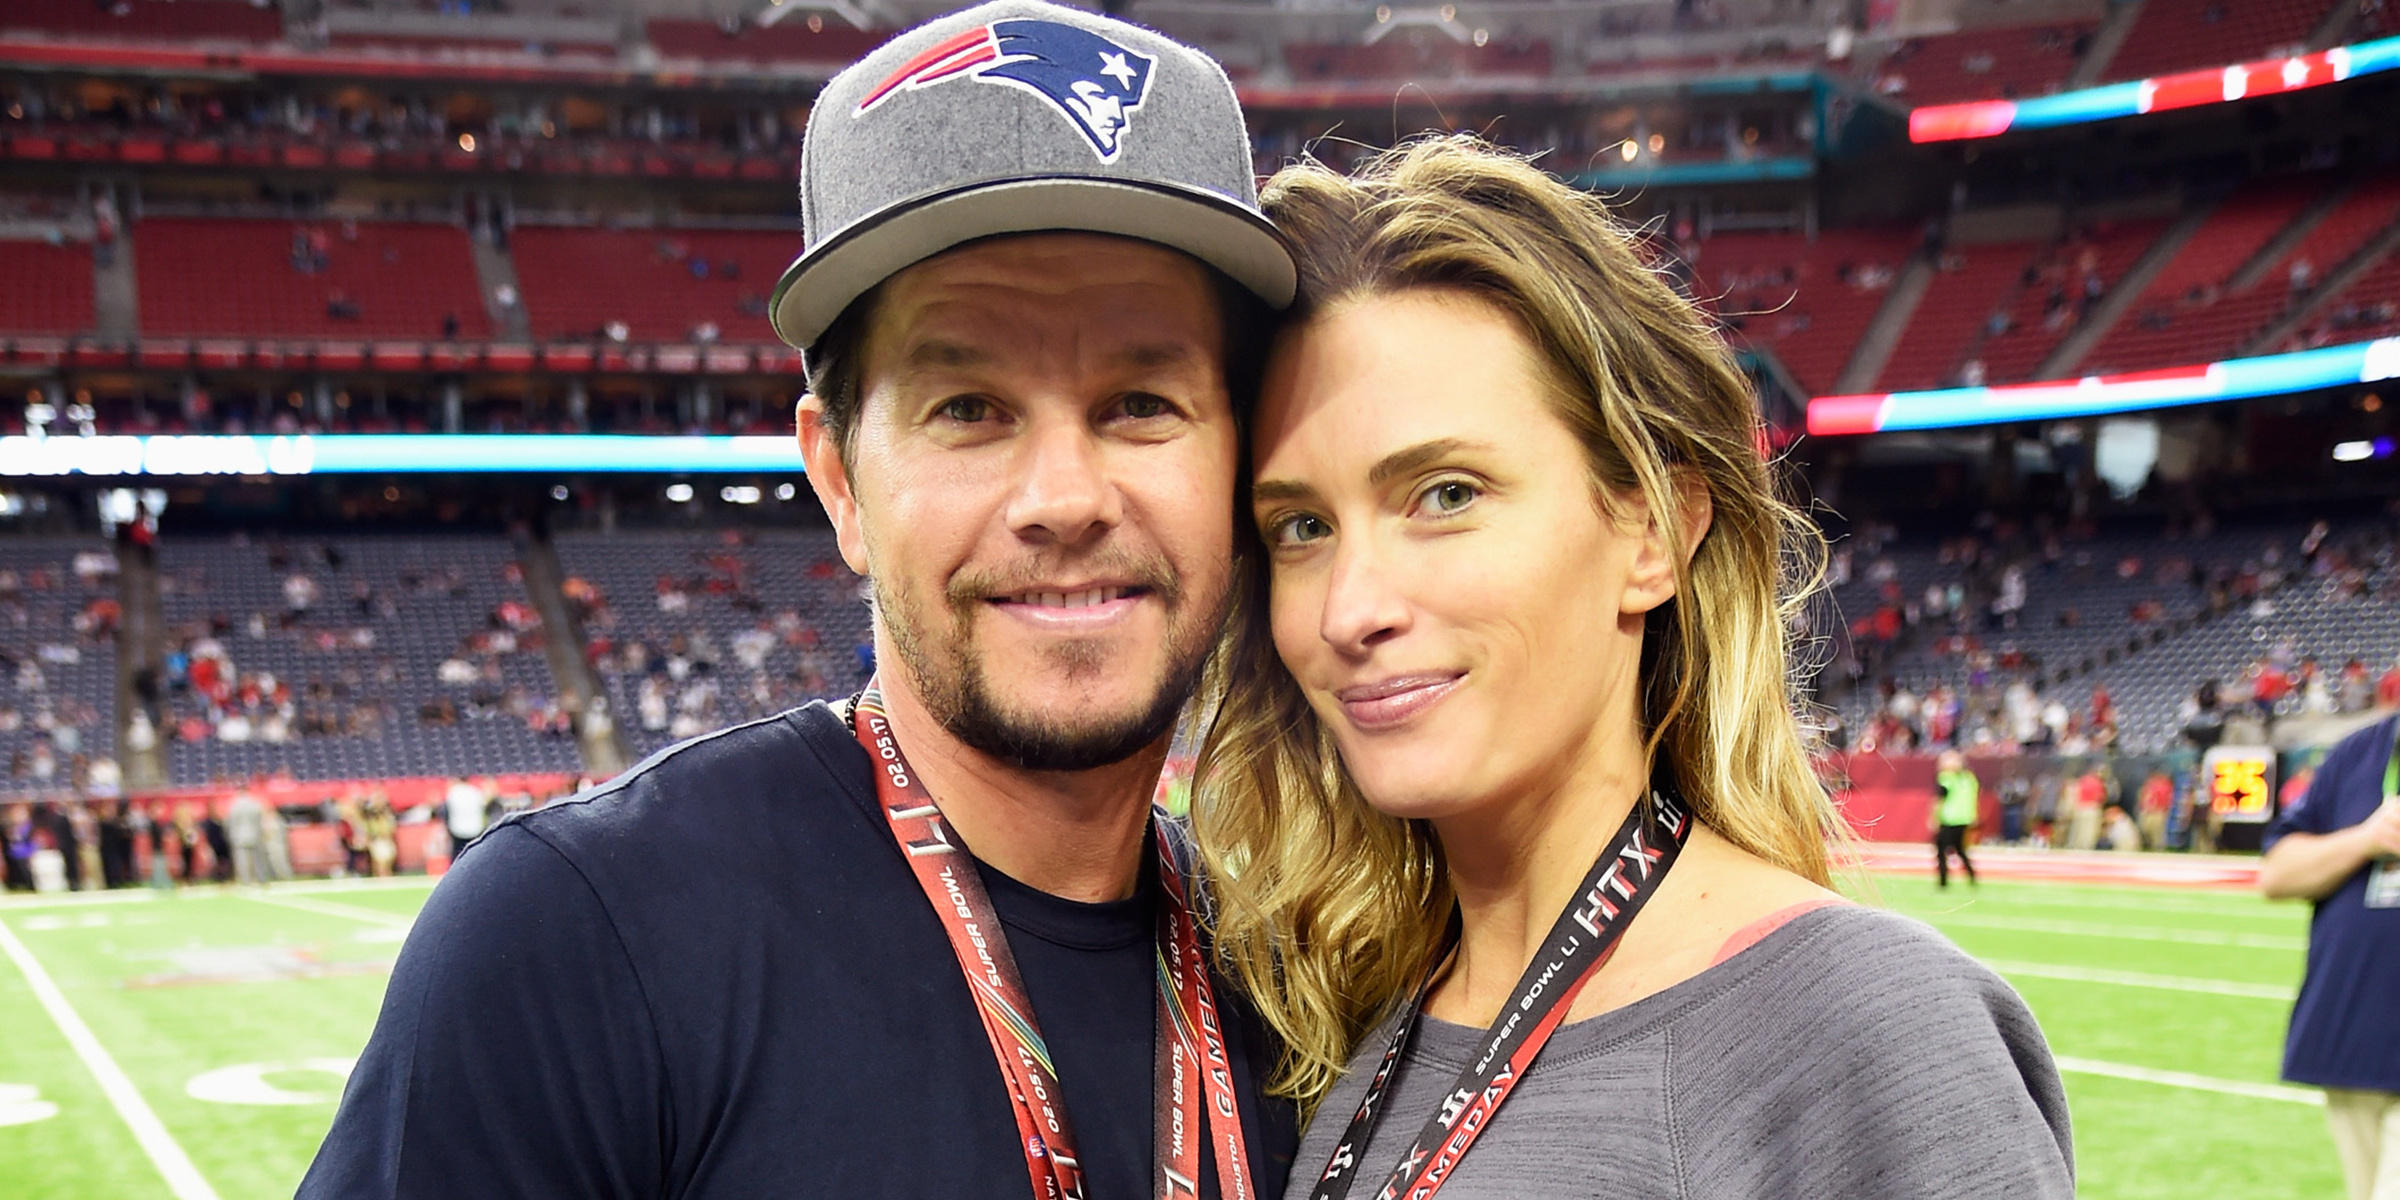 Mark Wahlberg and Rhea Wahlberg. | Source: Getty Images